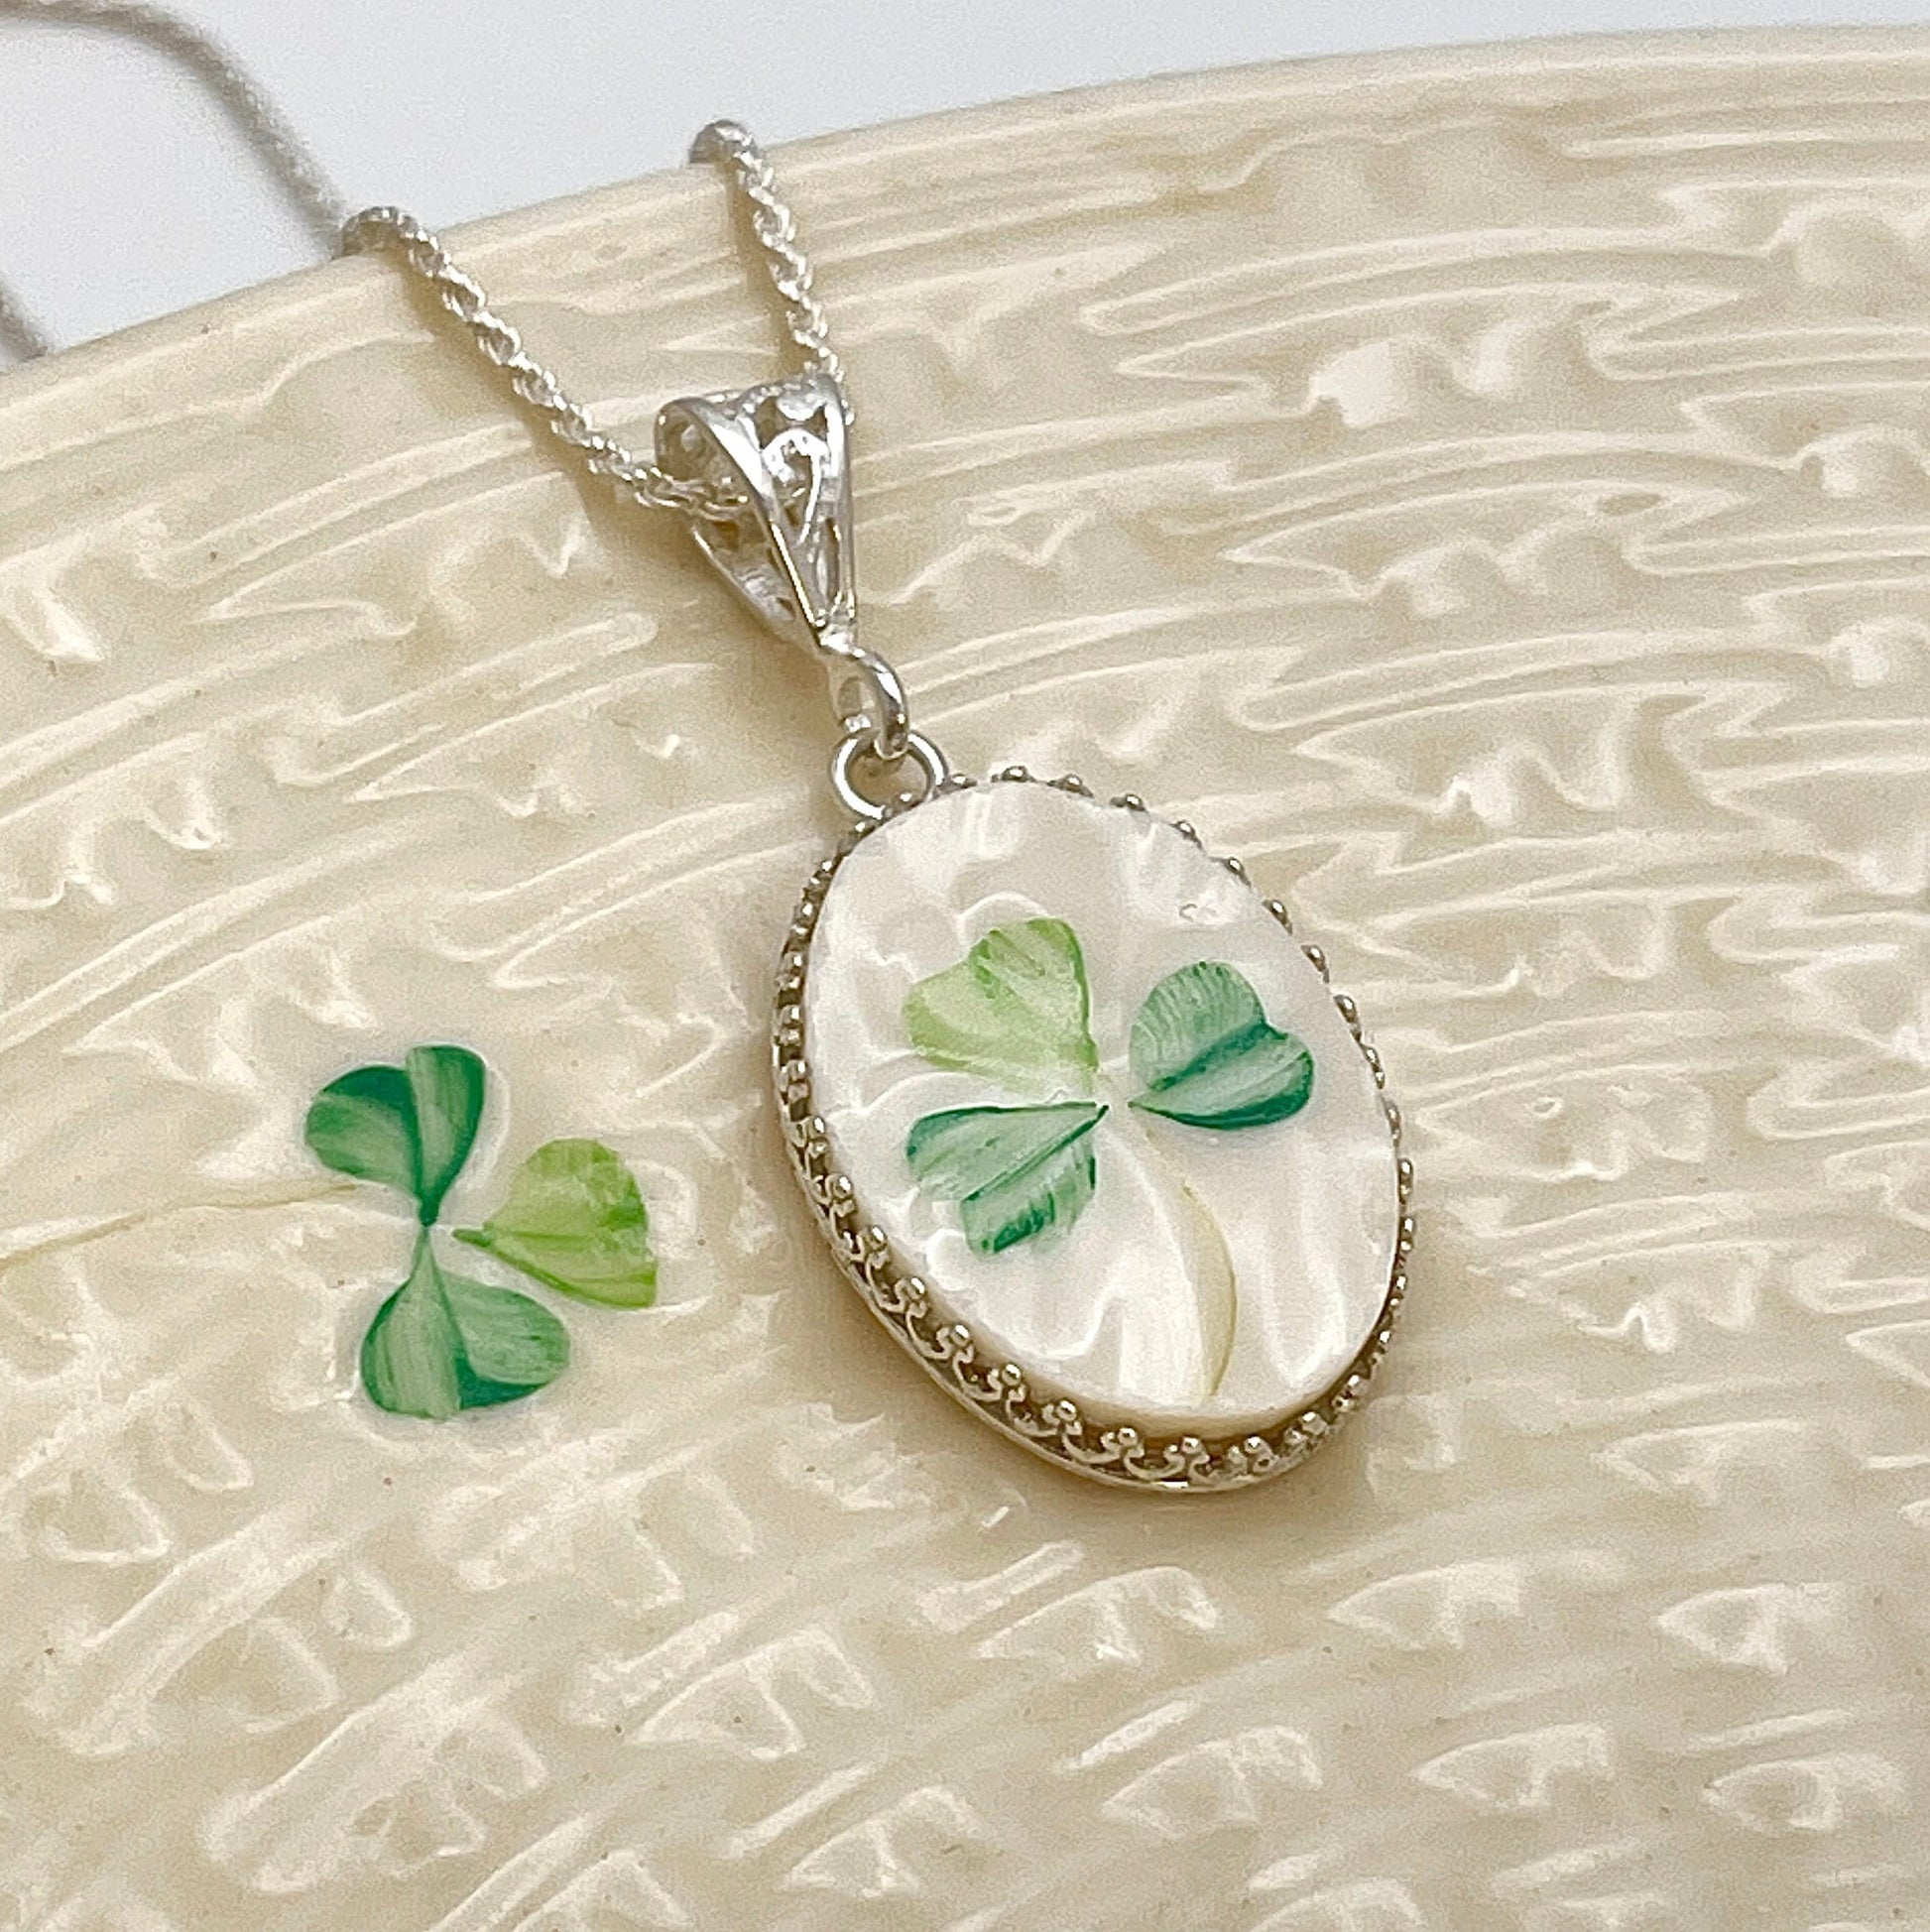 Celtic Necklace, Irish Broken China Jewelry, 20th Anniversary Gift for Wife, Sterling Silver, Belleek China from Ireland, Gifts for Her